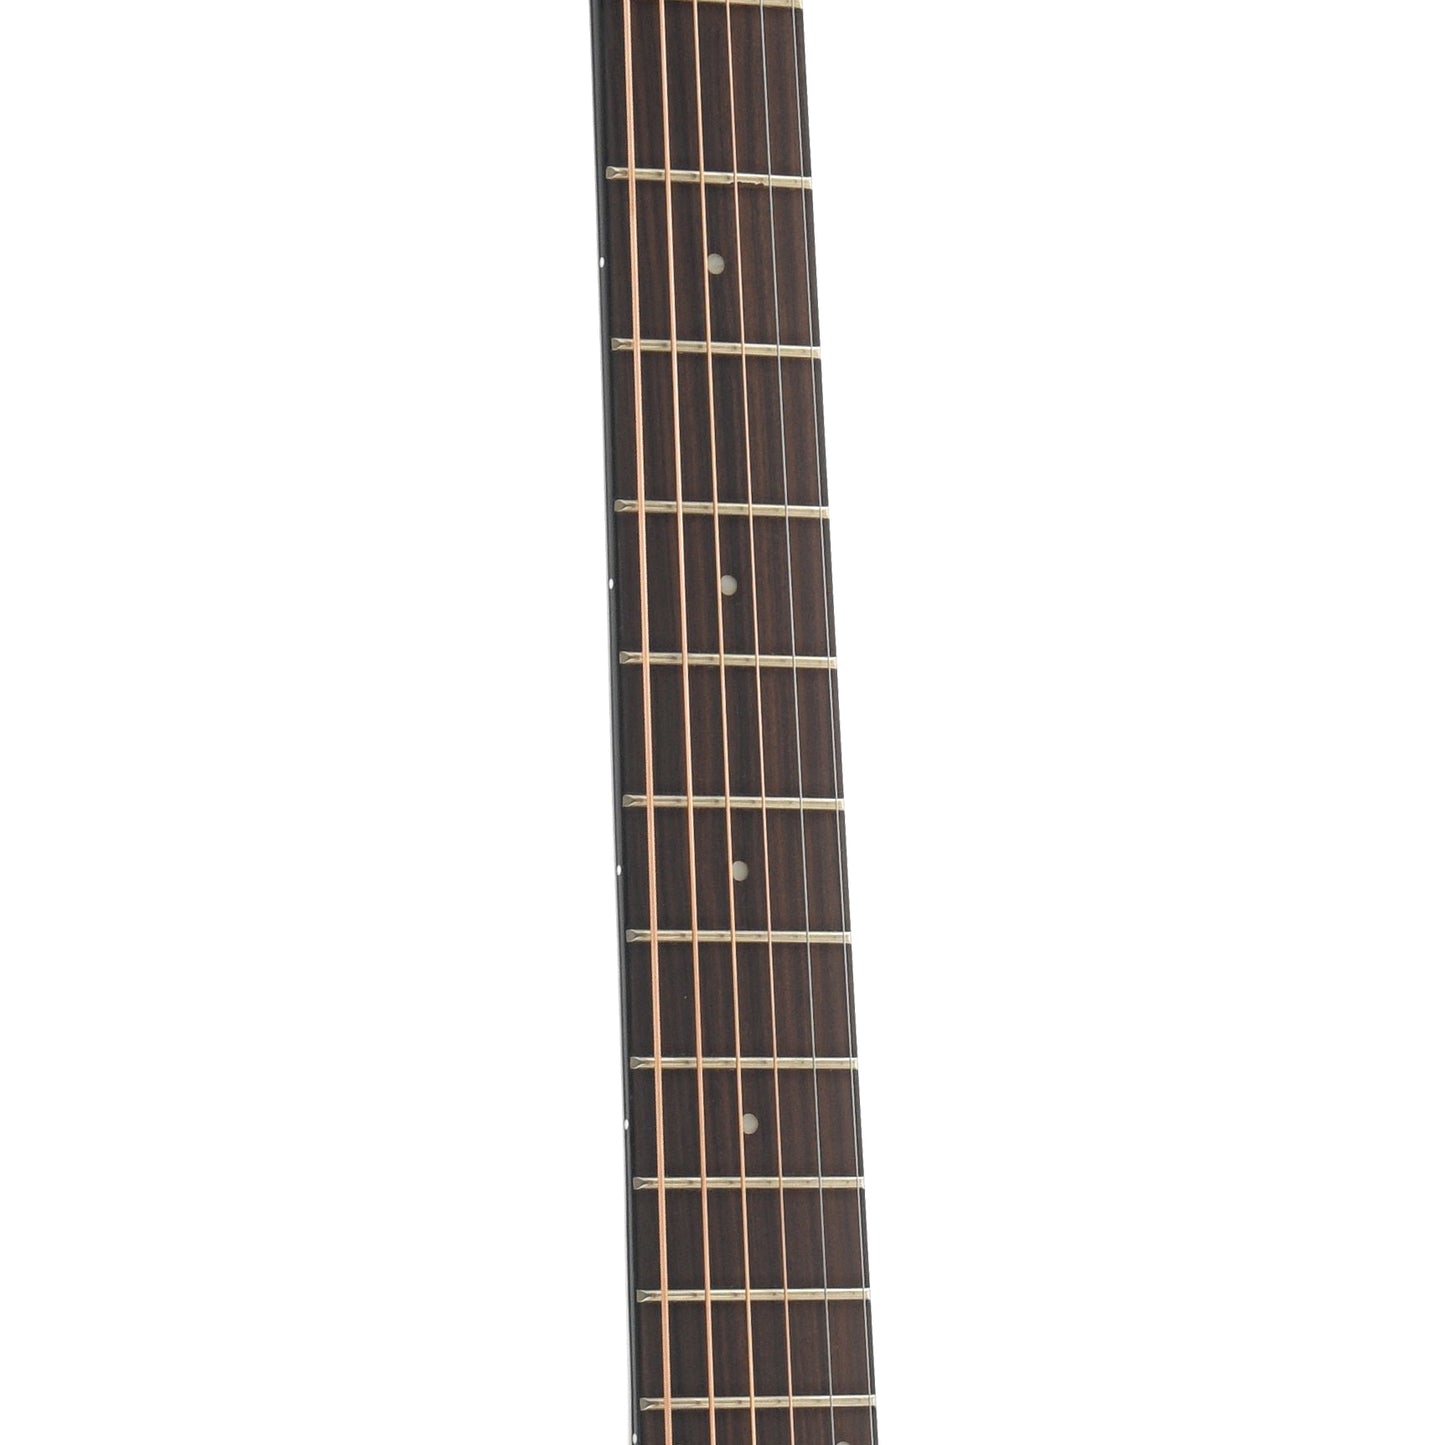 Image 8 of * Elderly Instruments "000" Guitar Outfit - SKU# DEAL2 : Product Type Flat-top Guitars : Elderly Instruments